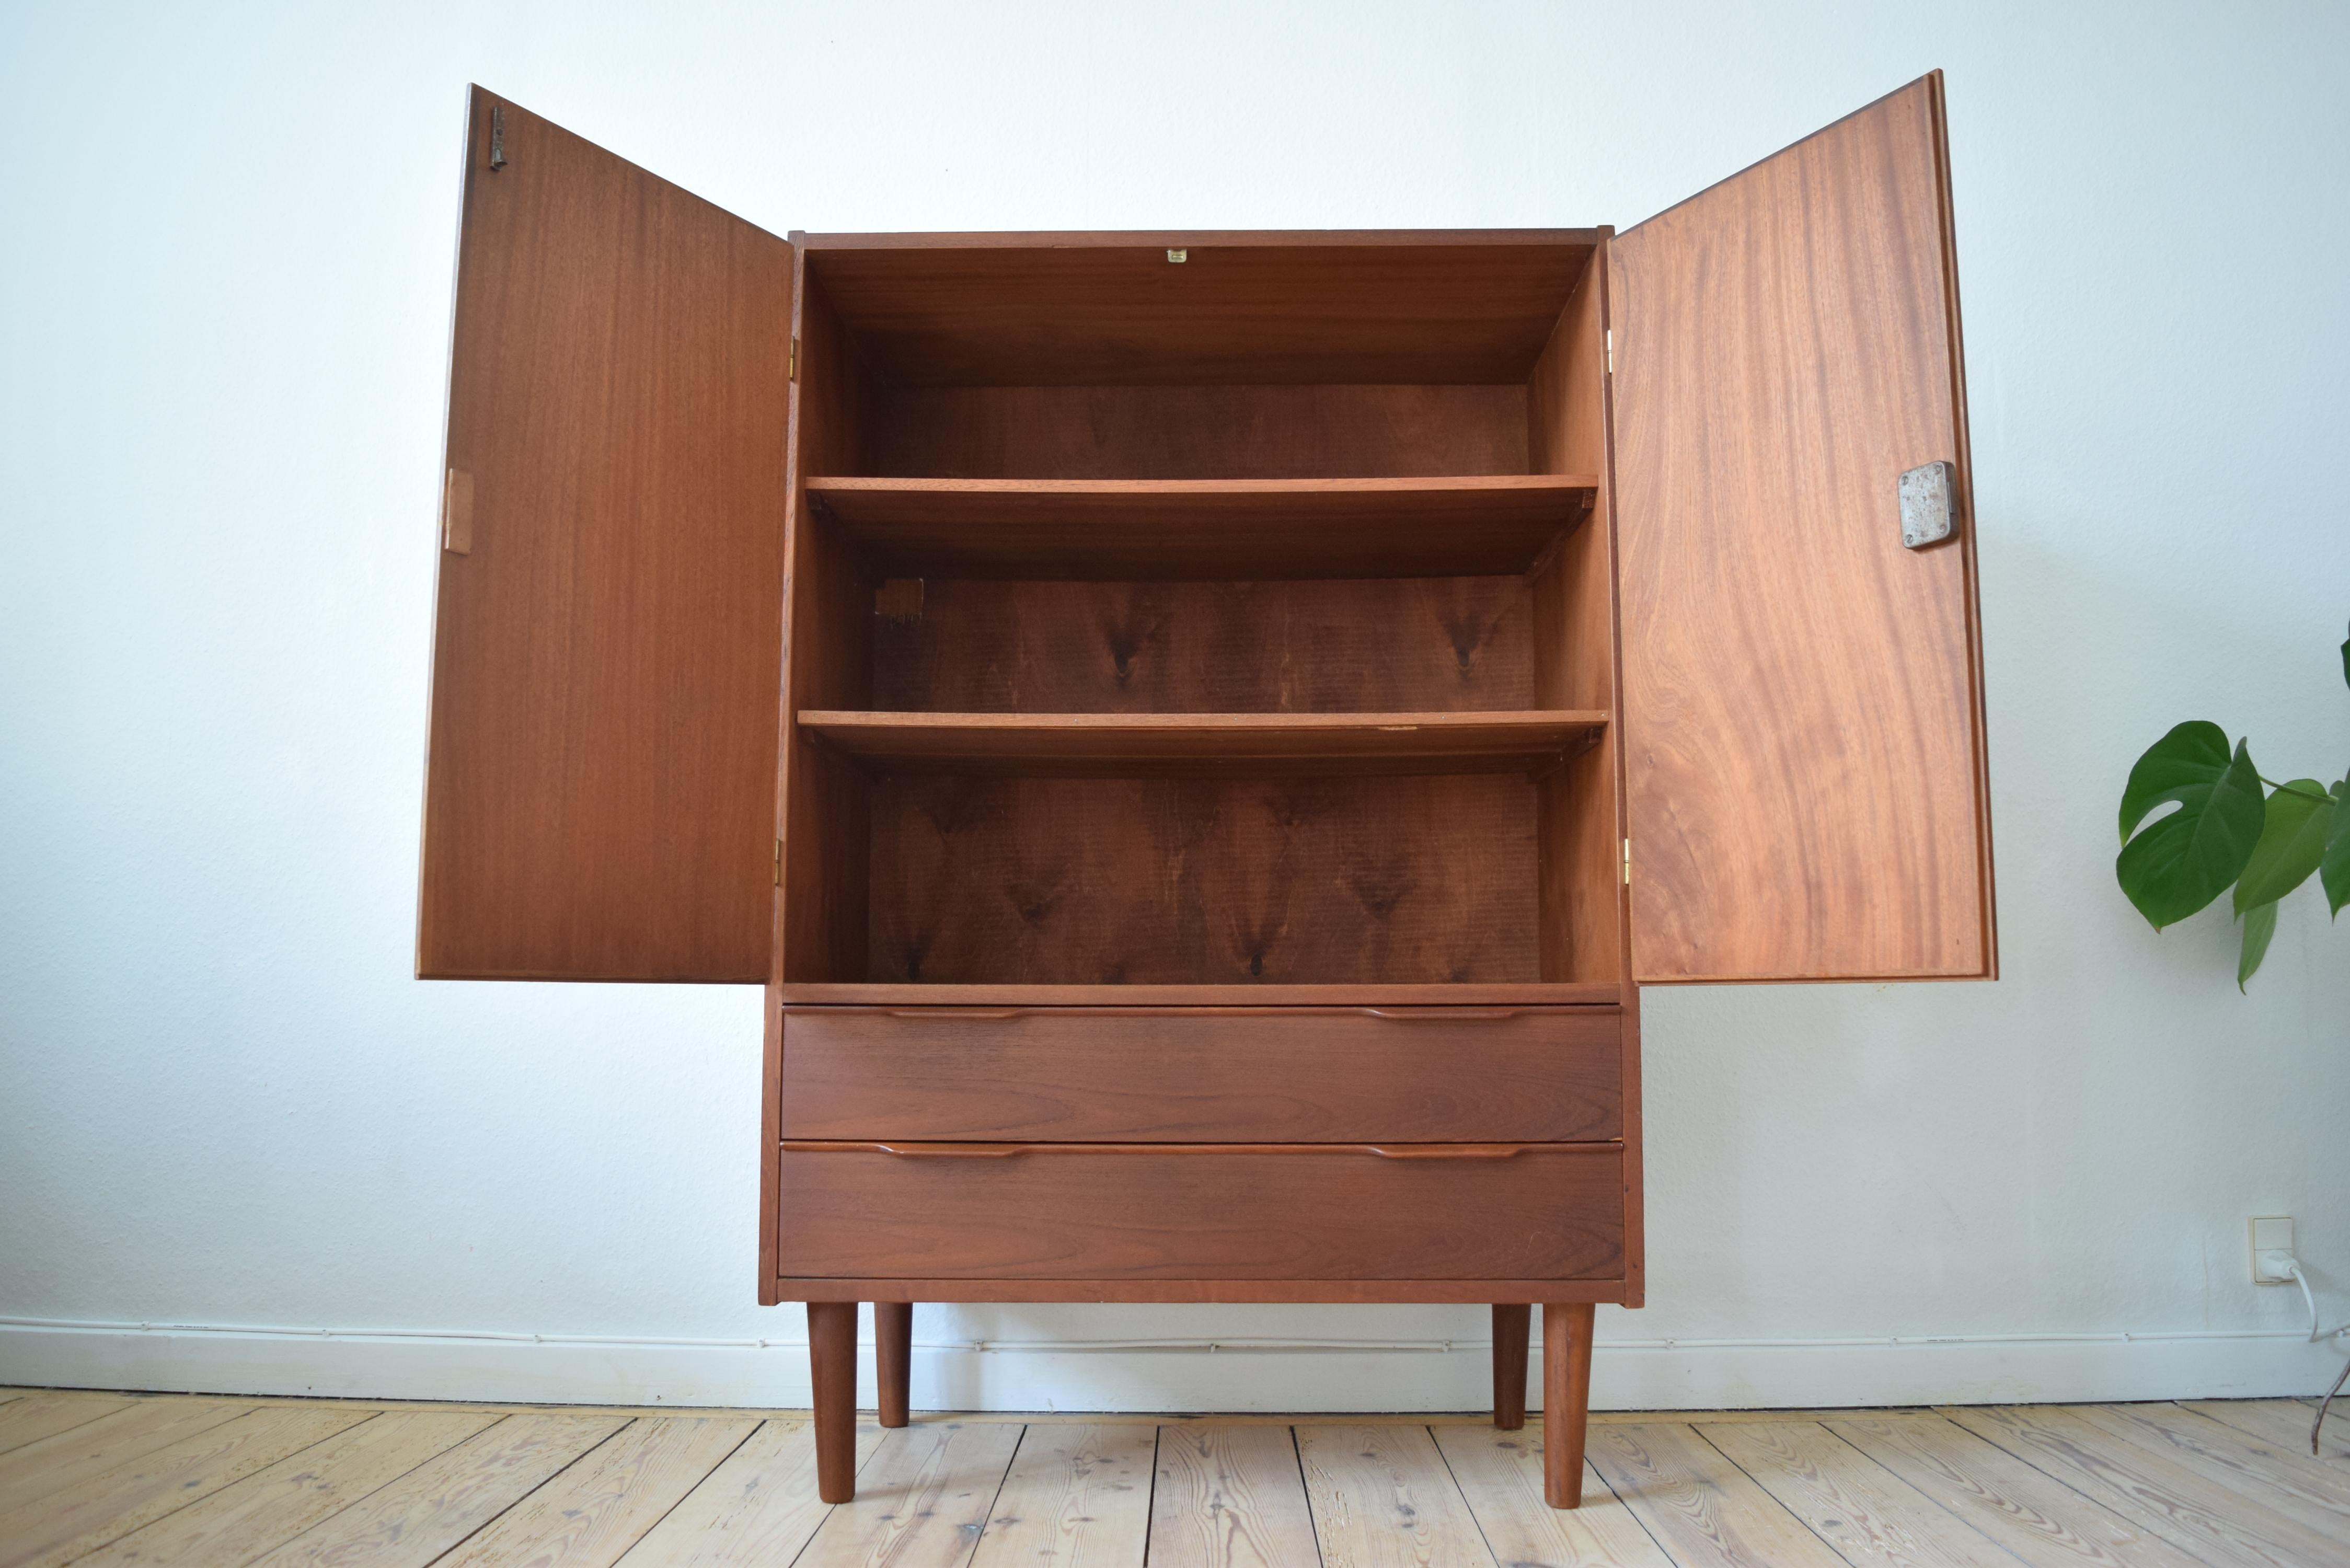 High sideboard manufactured in Denmark in the 1960s. Features two drawers and two lockable doors (key included) with shelves. Sits on tapered teak legs. Previous interior ducting hole has been covered with a teak plate.